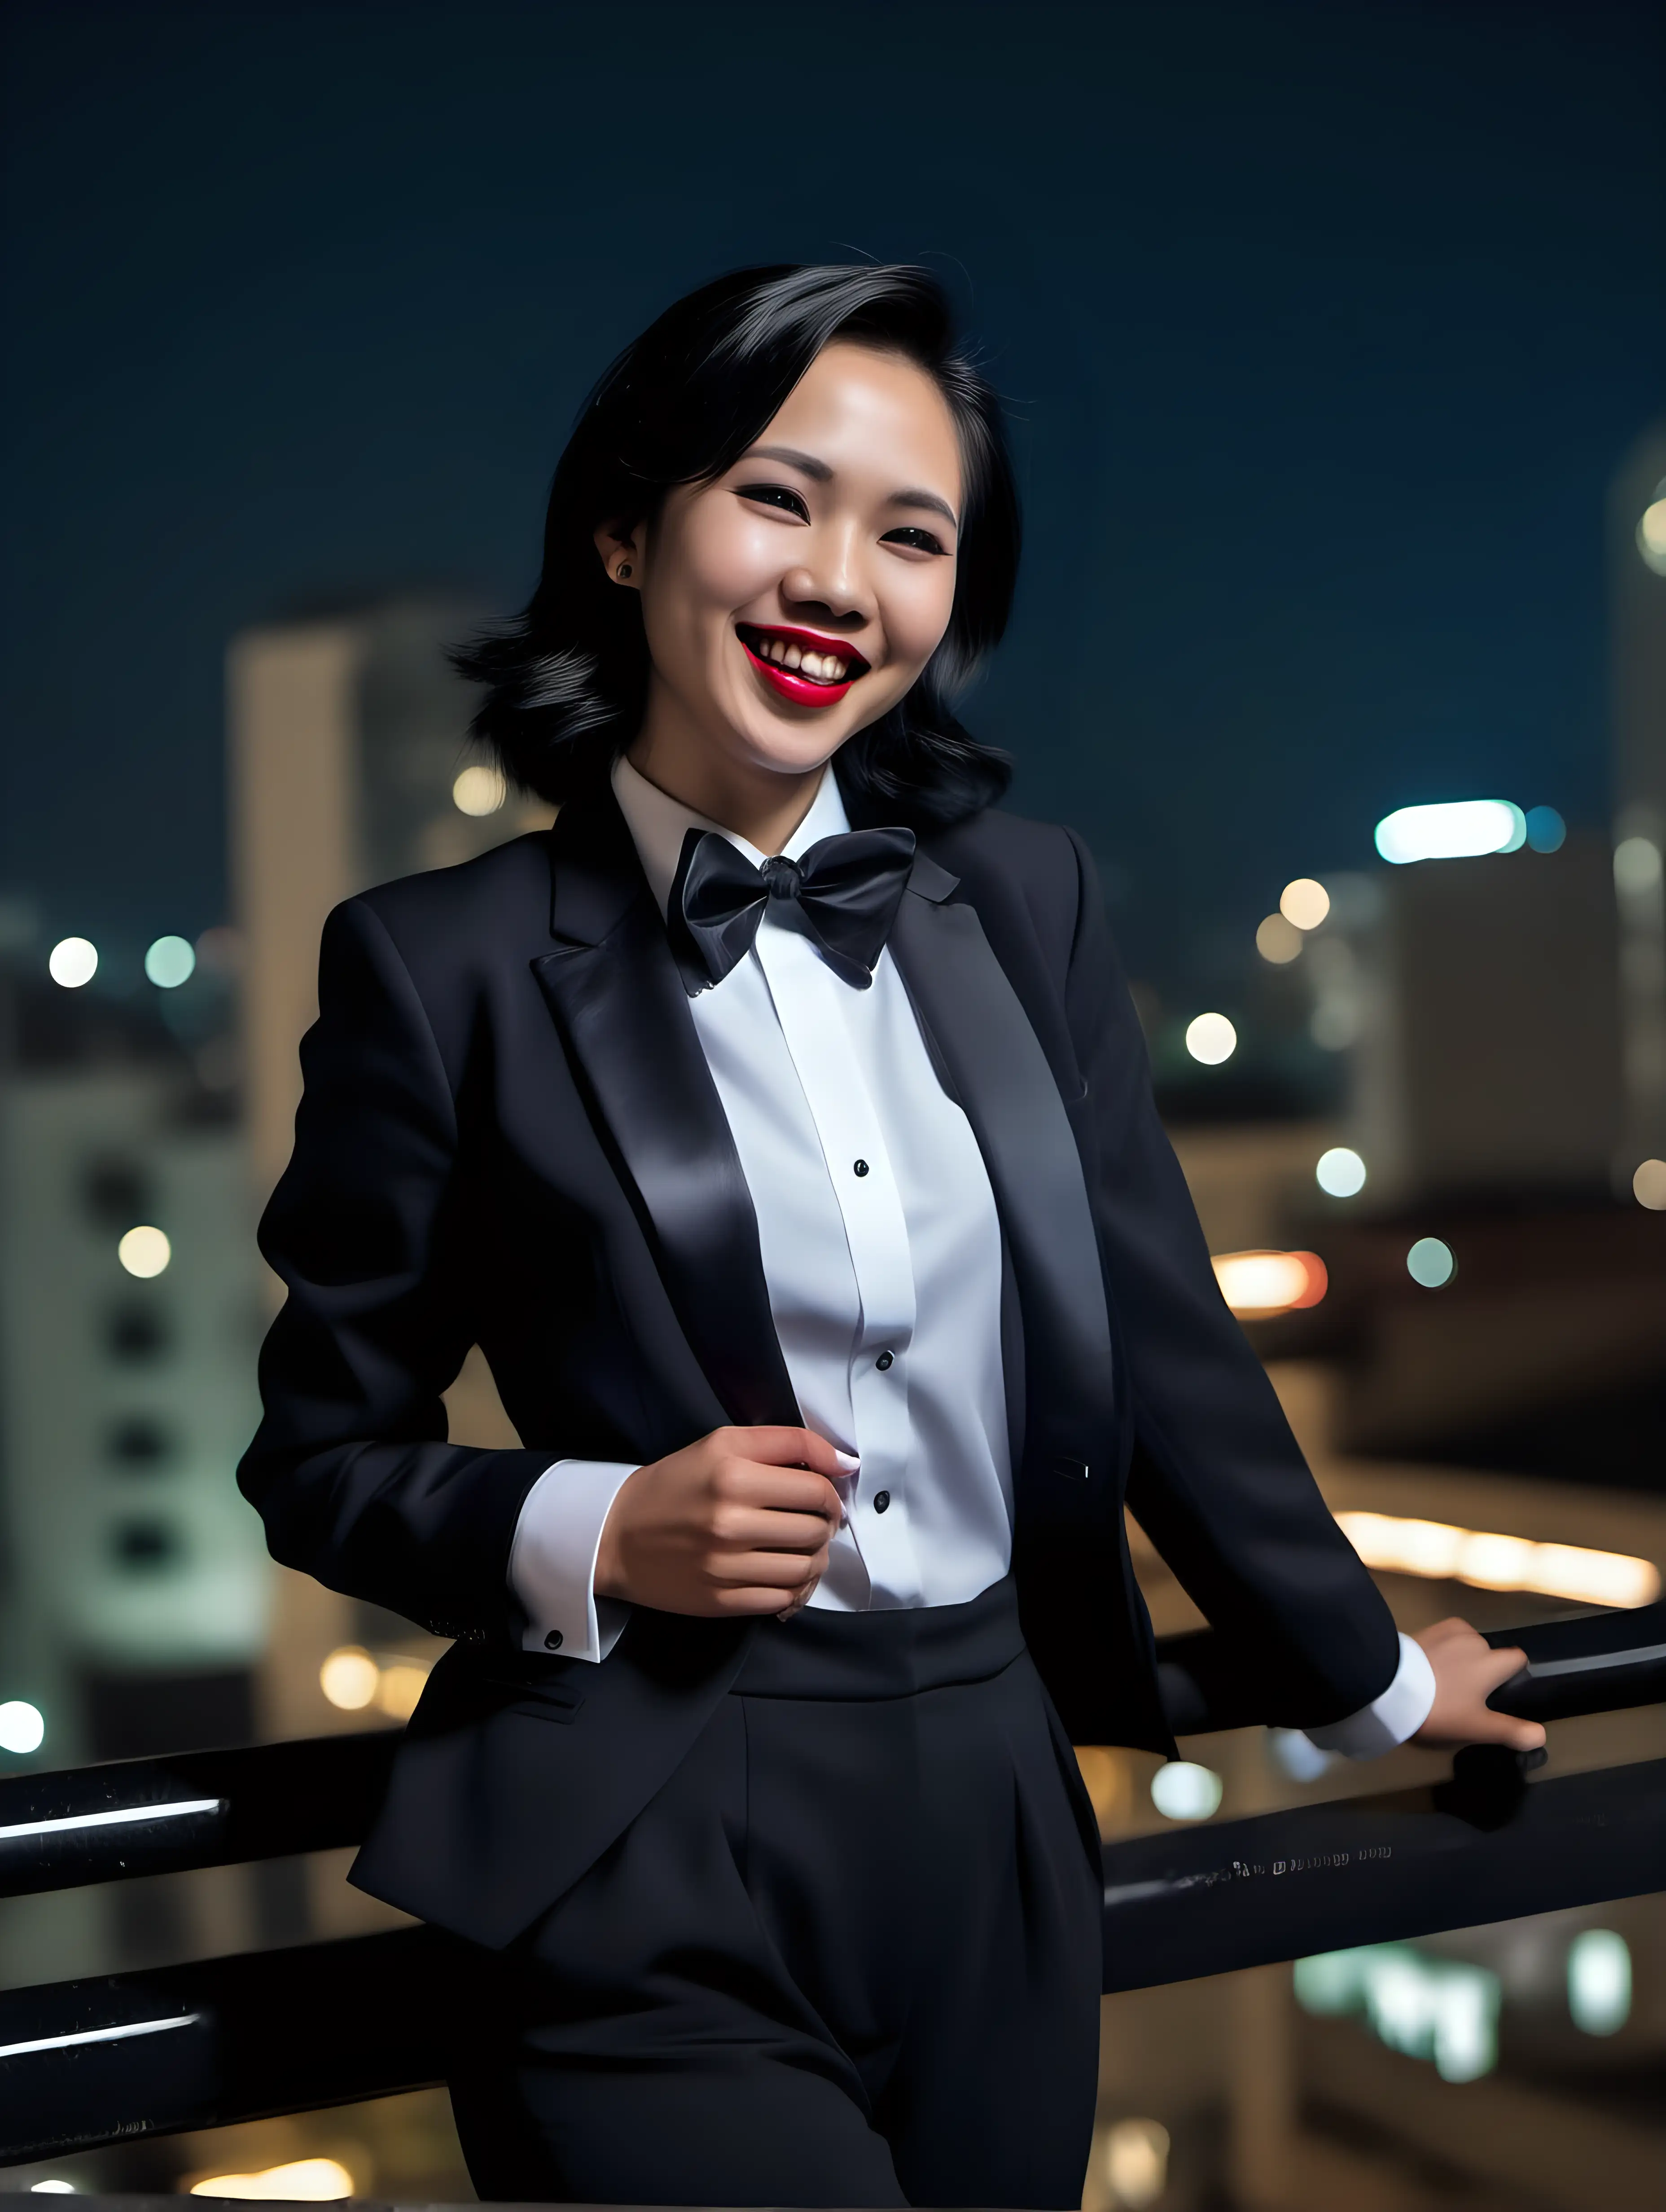 Chic-Vietnamese-Woman-in-Tuxedo-Laughing-on-Urban-Rooftop-at-Night